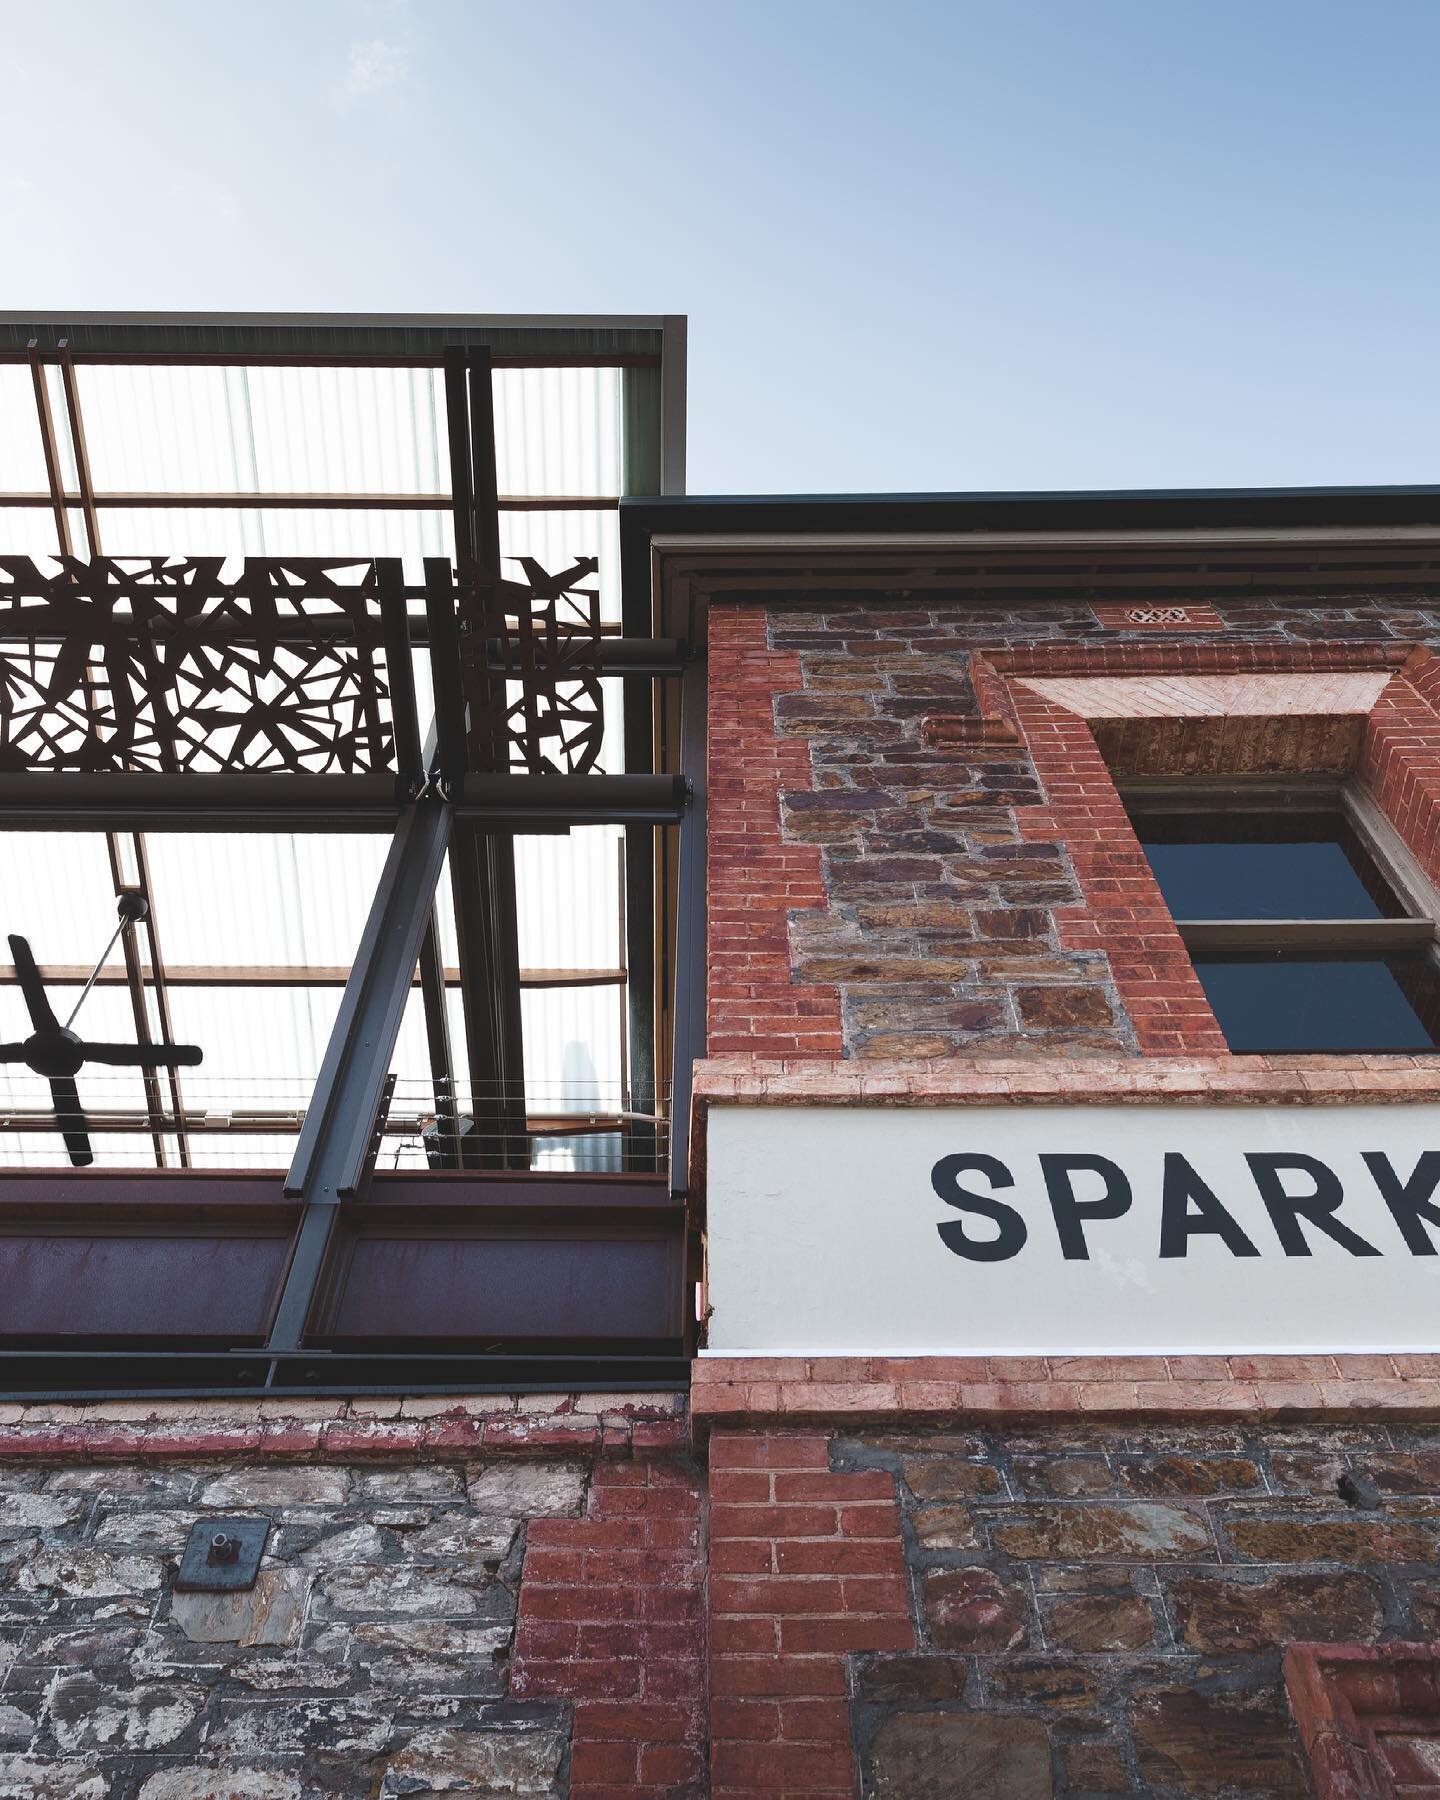 &quot;Over the course of the Sparkke at the Whitmore project, Troppo were faced with a number of unexpected discoveries.&nbsp;These rewrote the history of the building and influenced the outcome of the project.&nbsp;Join Ryan as he relates what was f